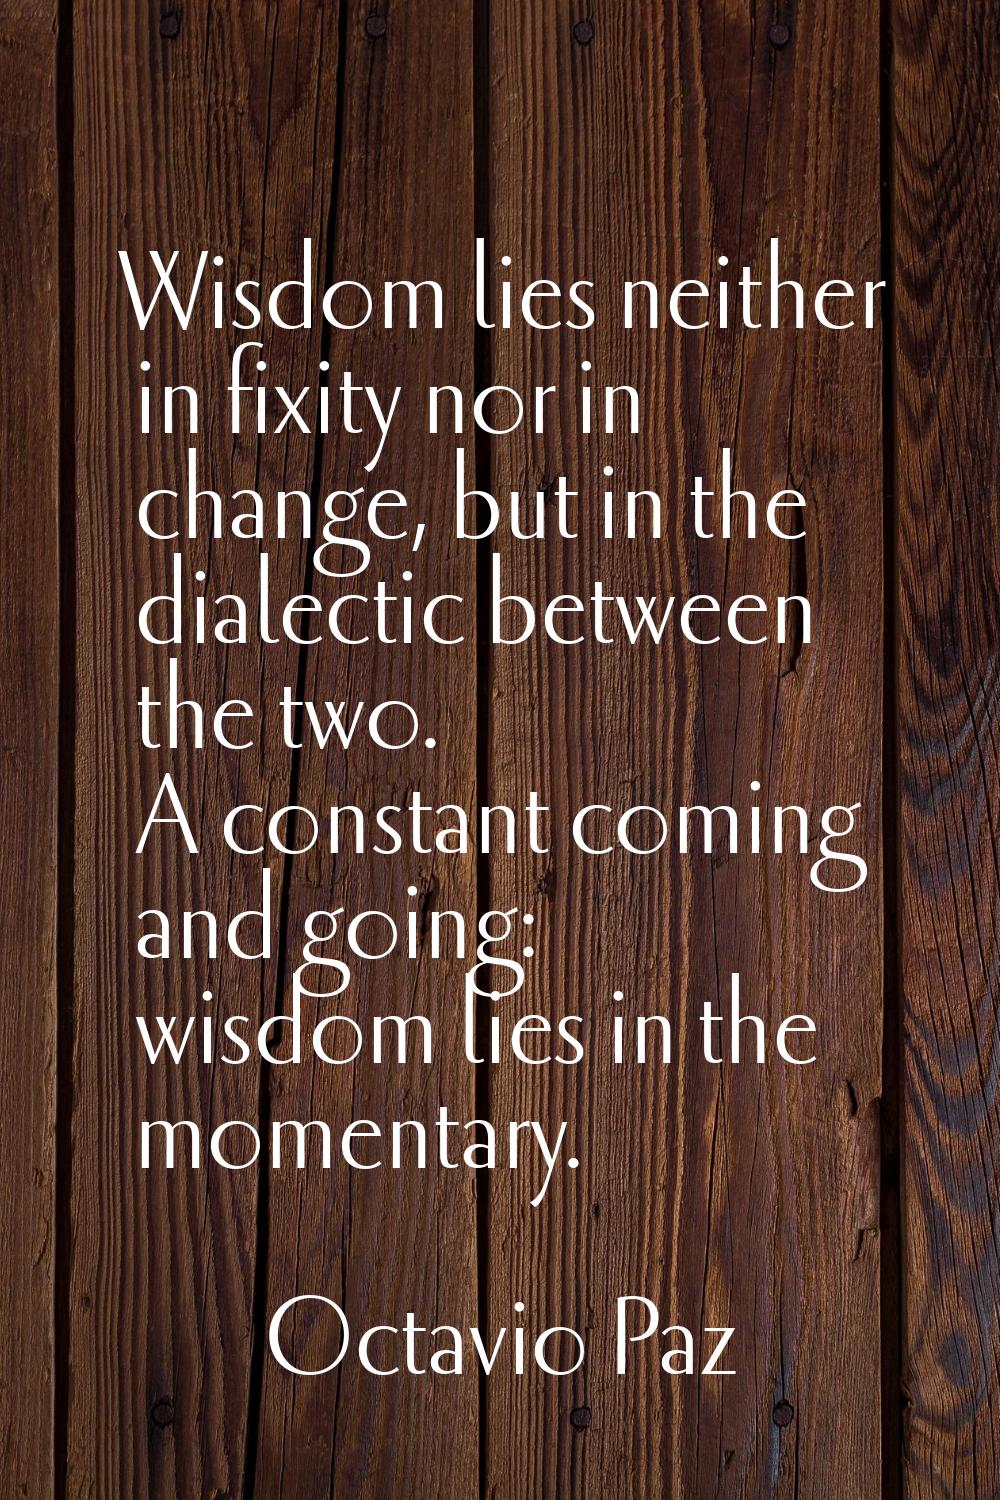 Wisdom lies neither in fixity nor in change, but in the dialectic between the two. A constant comin